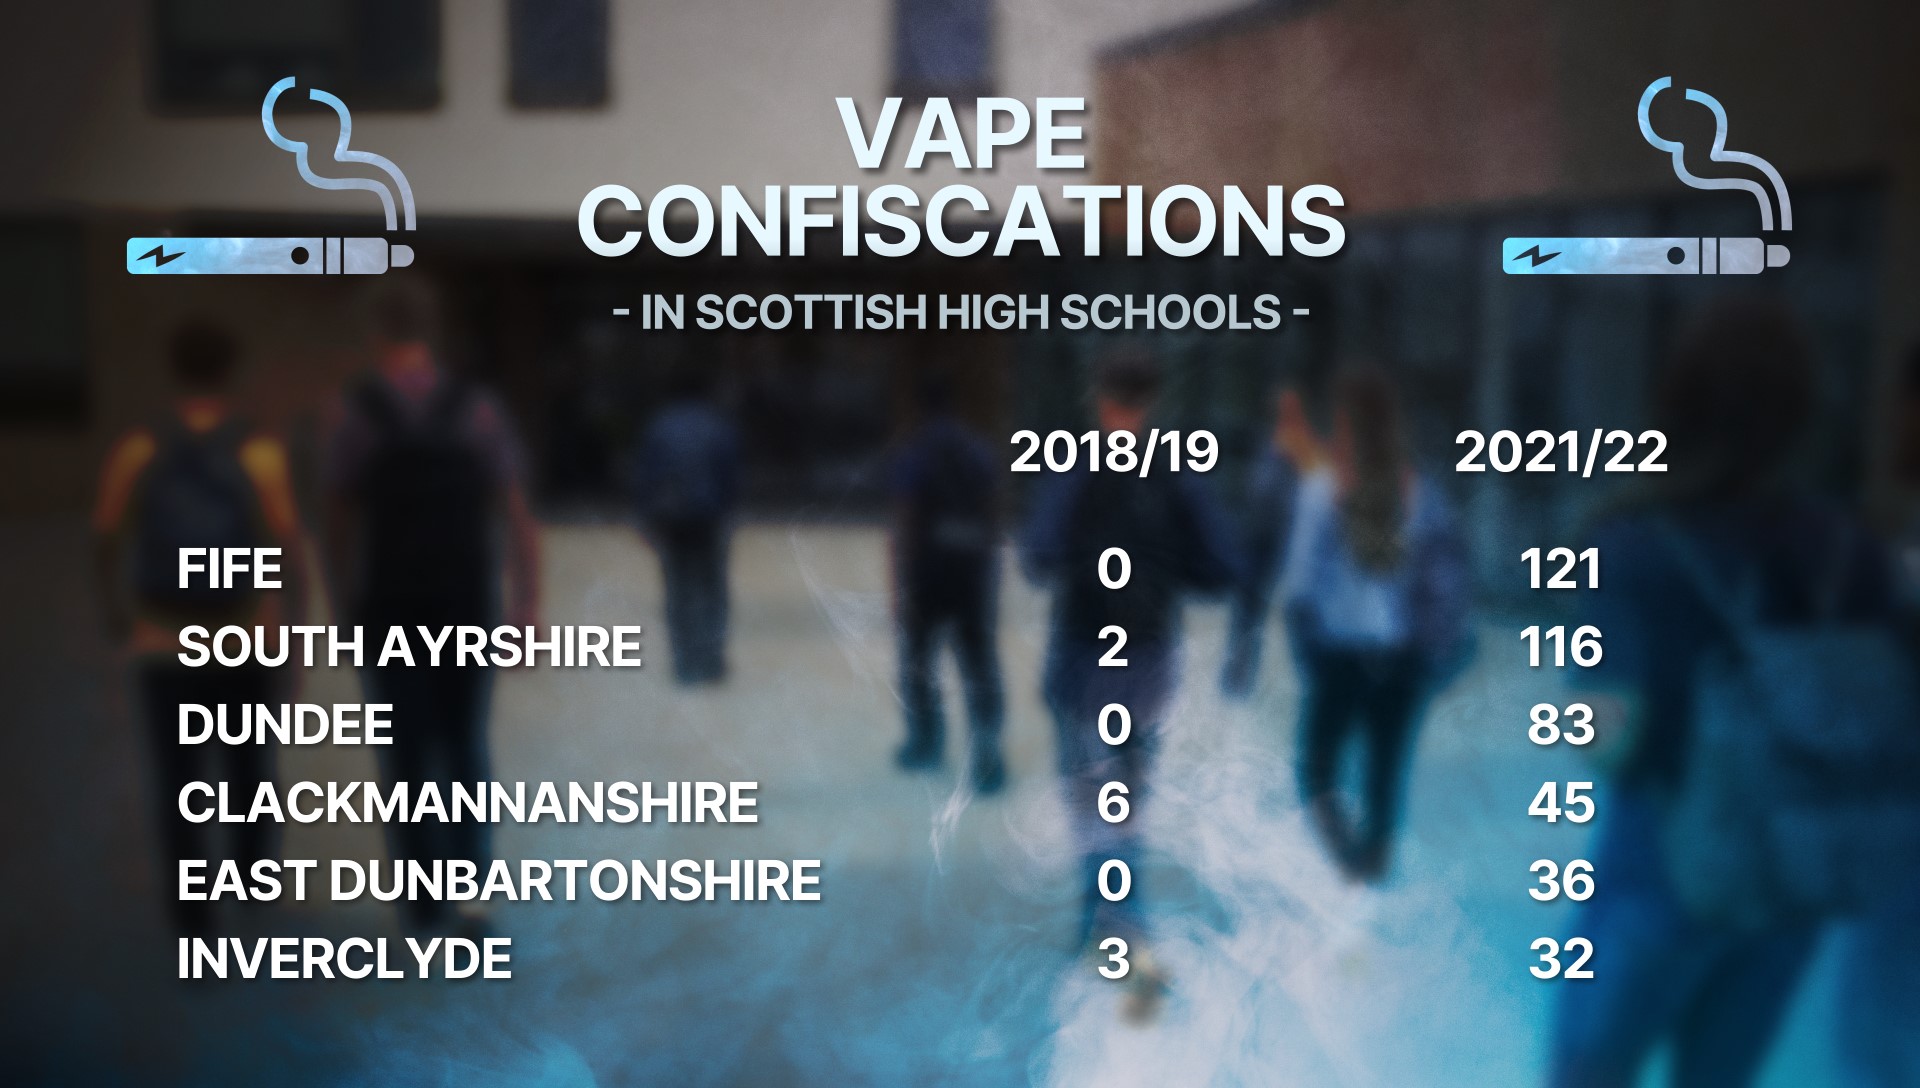 STV News revealed a soaring number of vaping confiscations in Scotland's schools.